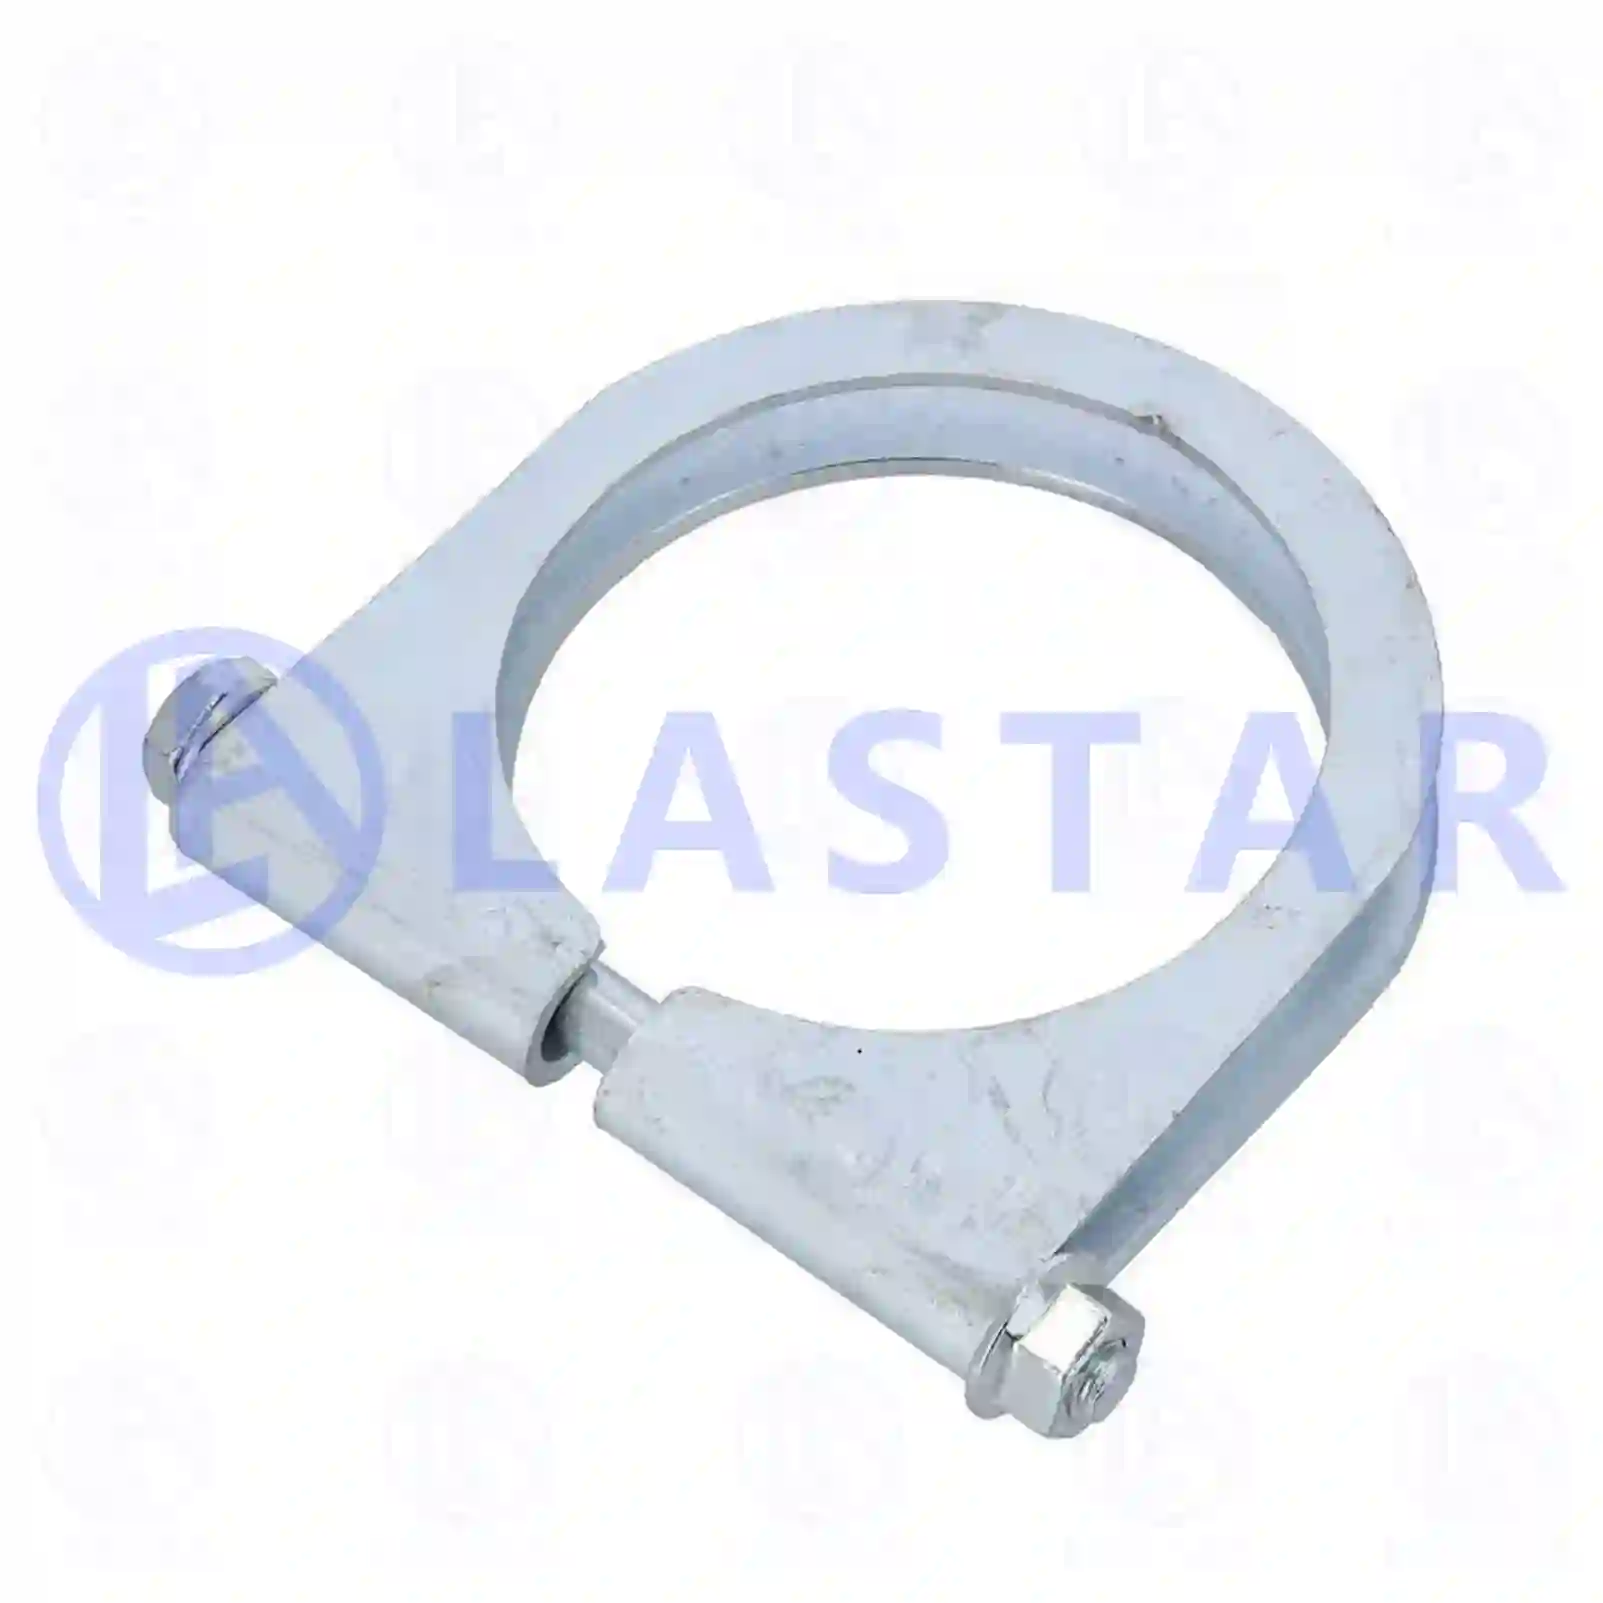 Clamp, 77706302, 04839514, 4839514, 6744920040 ||  77706302 Lastar Spare Part | Truck Spare Parts, Auotomotive Spare Parts Clamp, 77706302, 04839514, 4839514, 6744920040 ||  77706302 Lastar Spare Part | Truck Spare Parts, Auotomotive Spare Parts